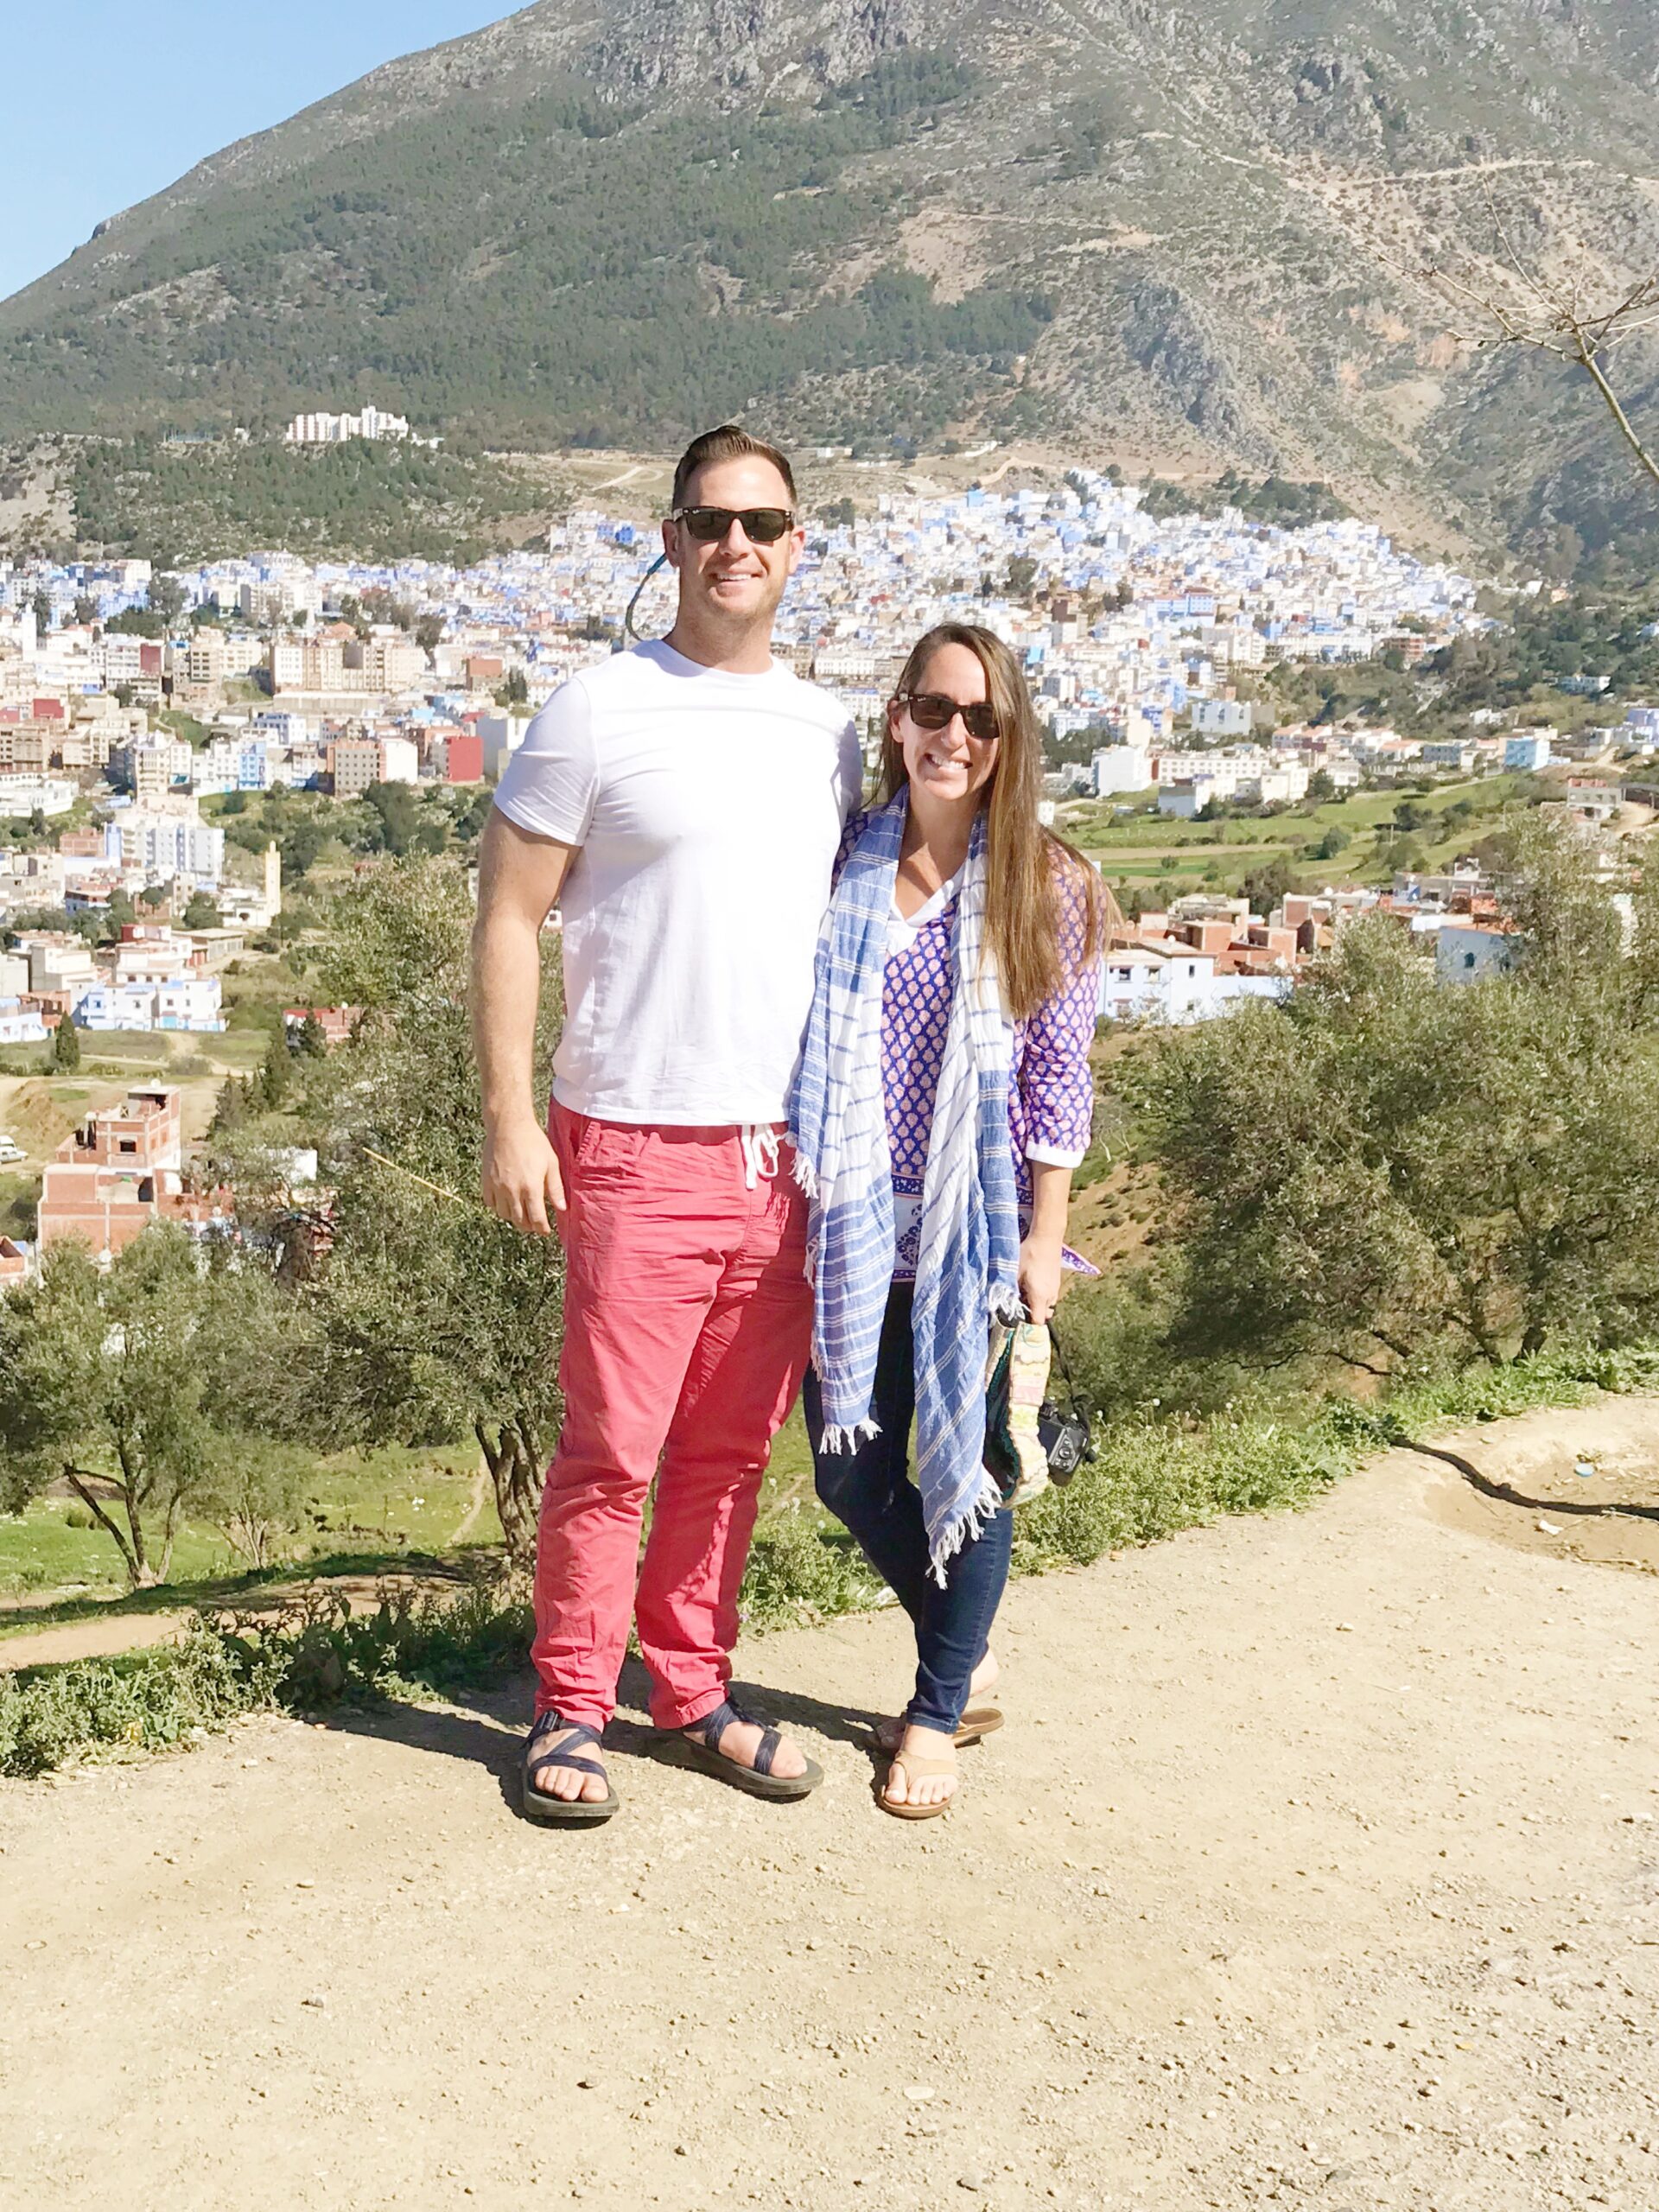 Arriving to Chefchaouen